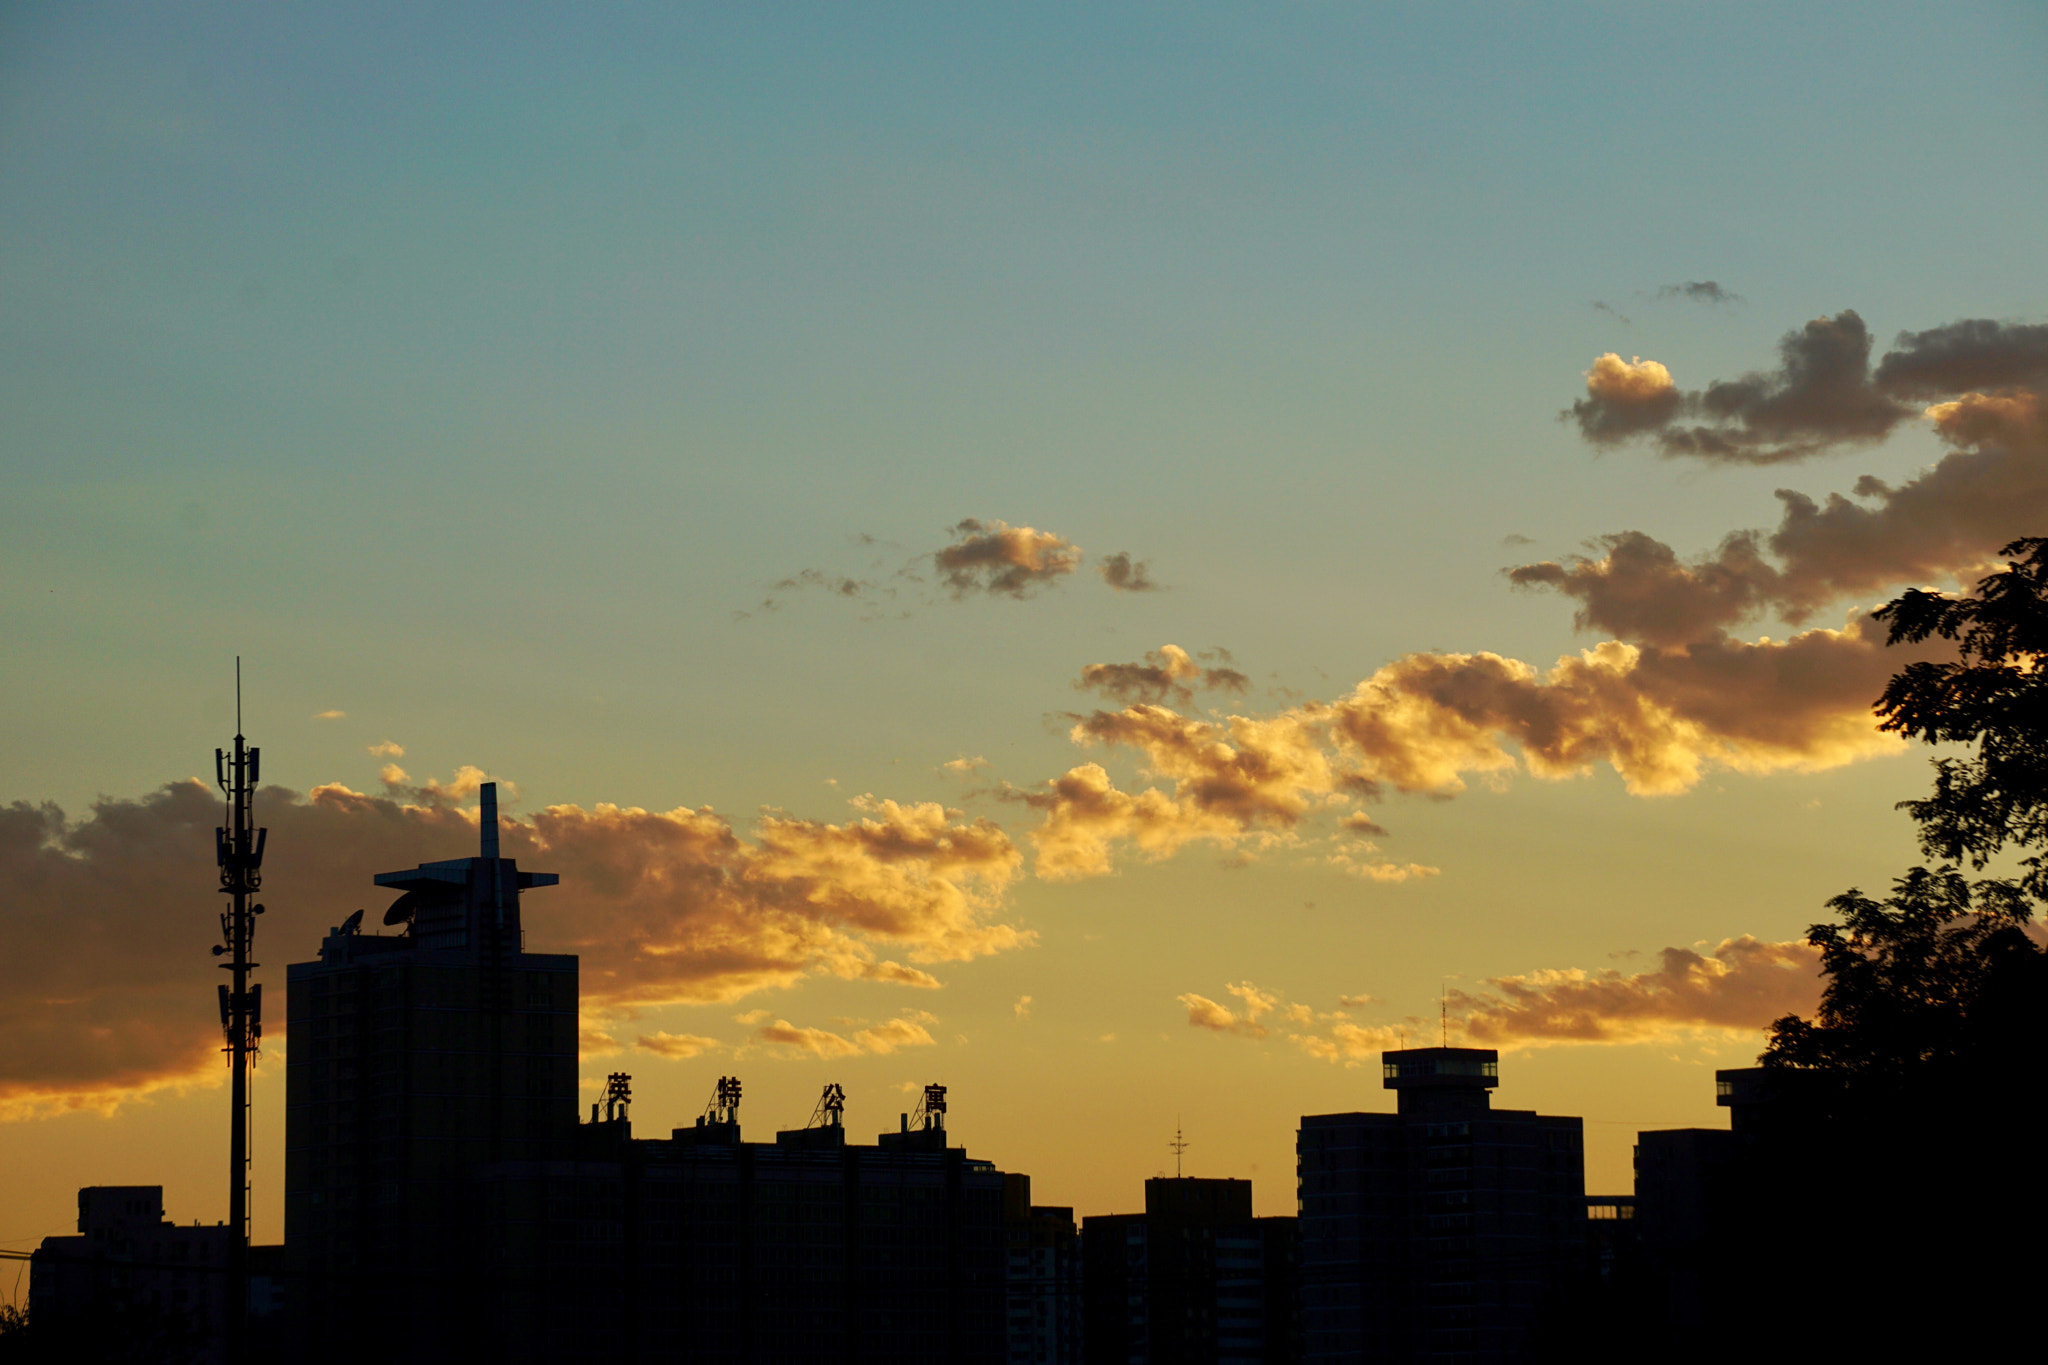 Sony a5100 sample photo. Sunset and buildings photography